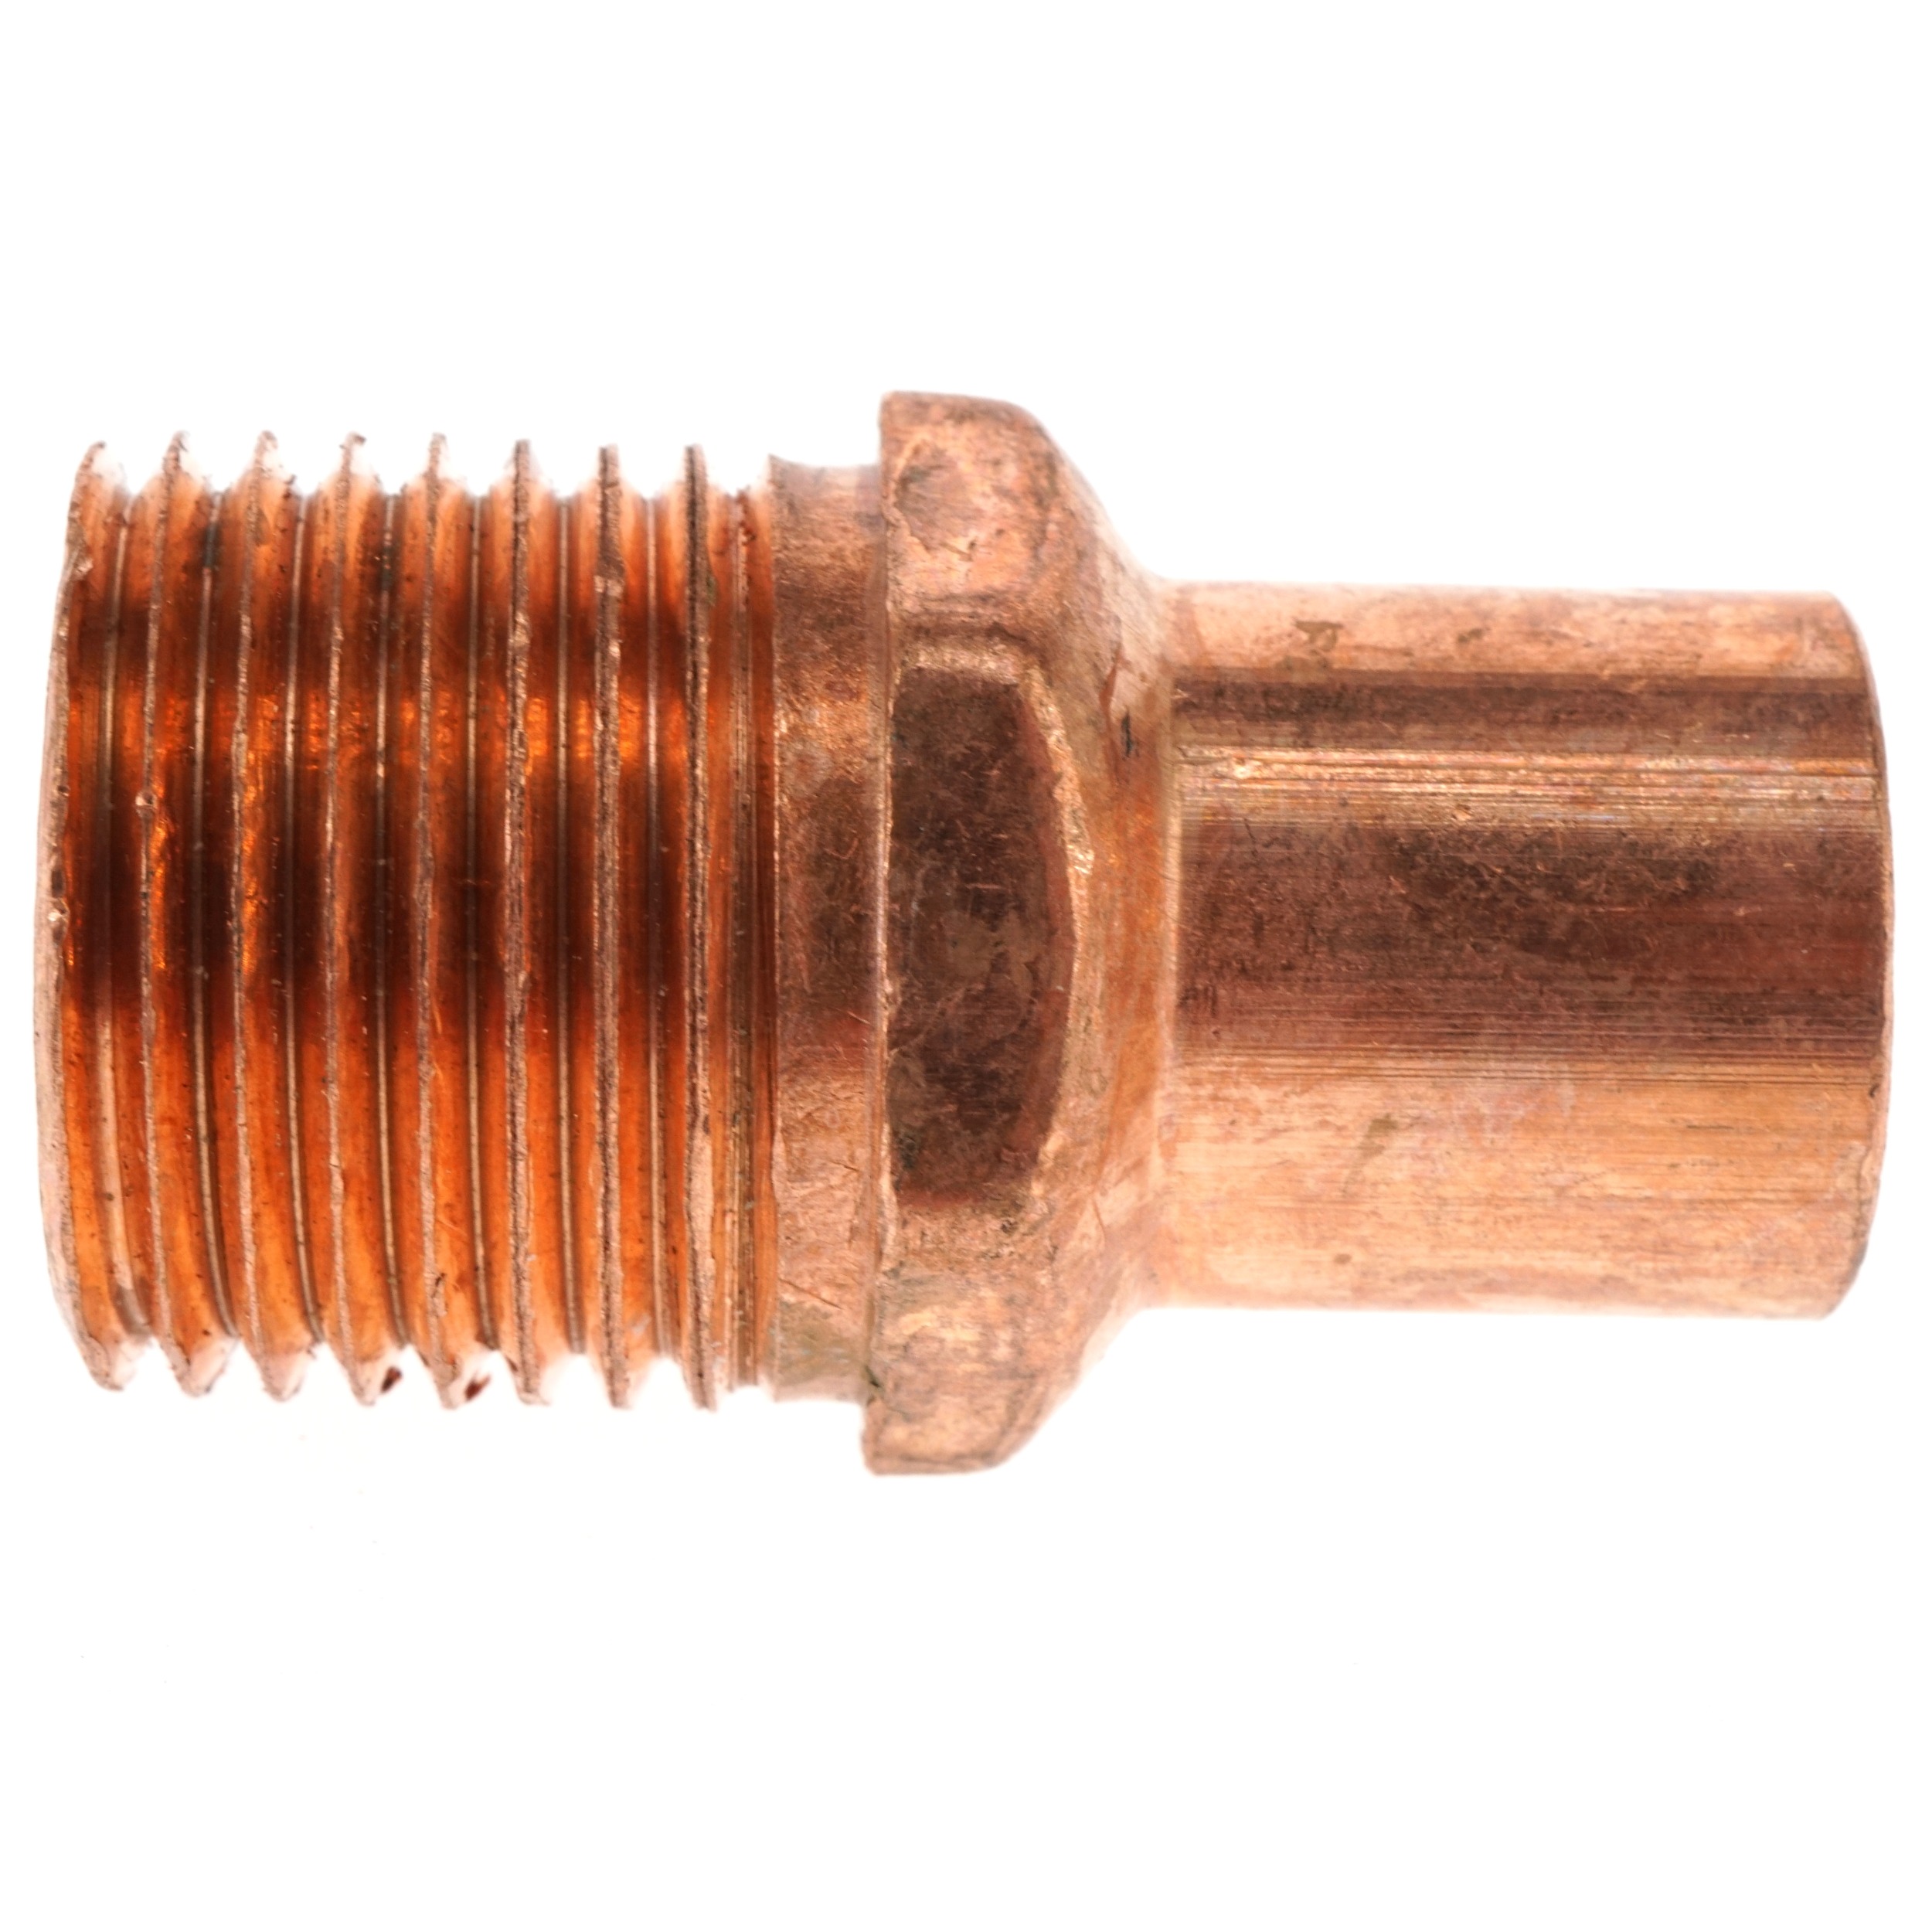 Elkhart Products 10030436 1/2" Male NPT to 1/2" Copper Pipe Solder Adapter